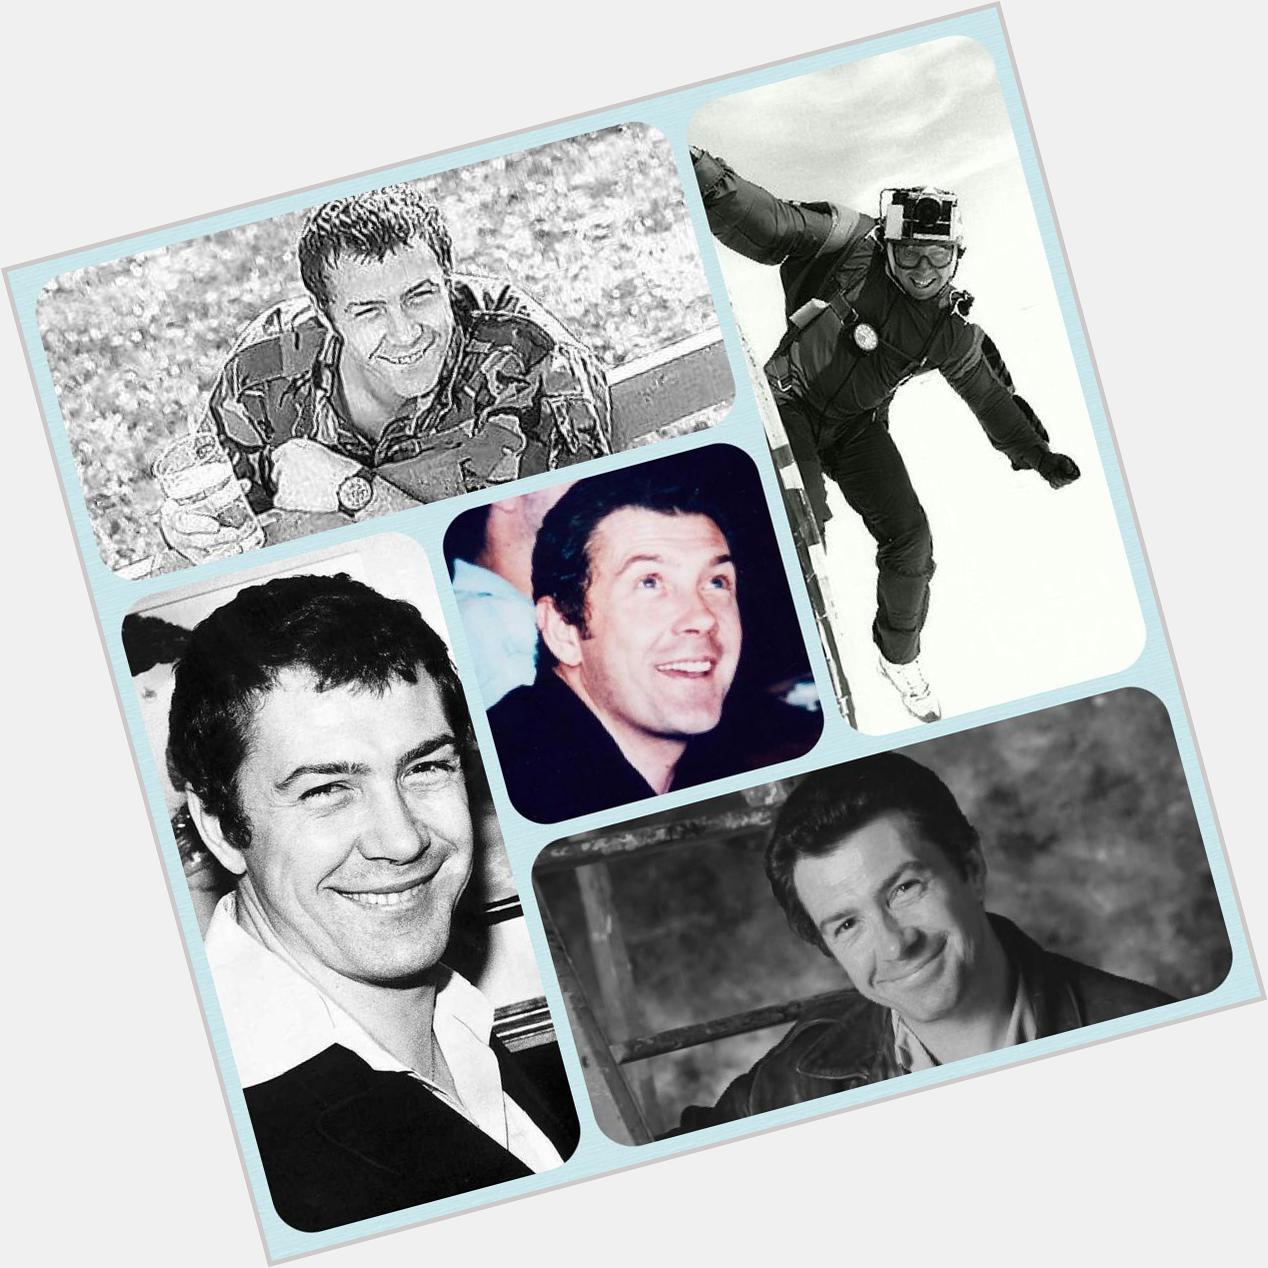 Happy Birthday Lewis Collins.
Gone but not forgotten and very much missed. 